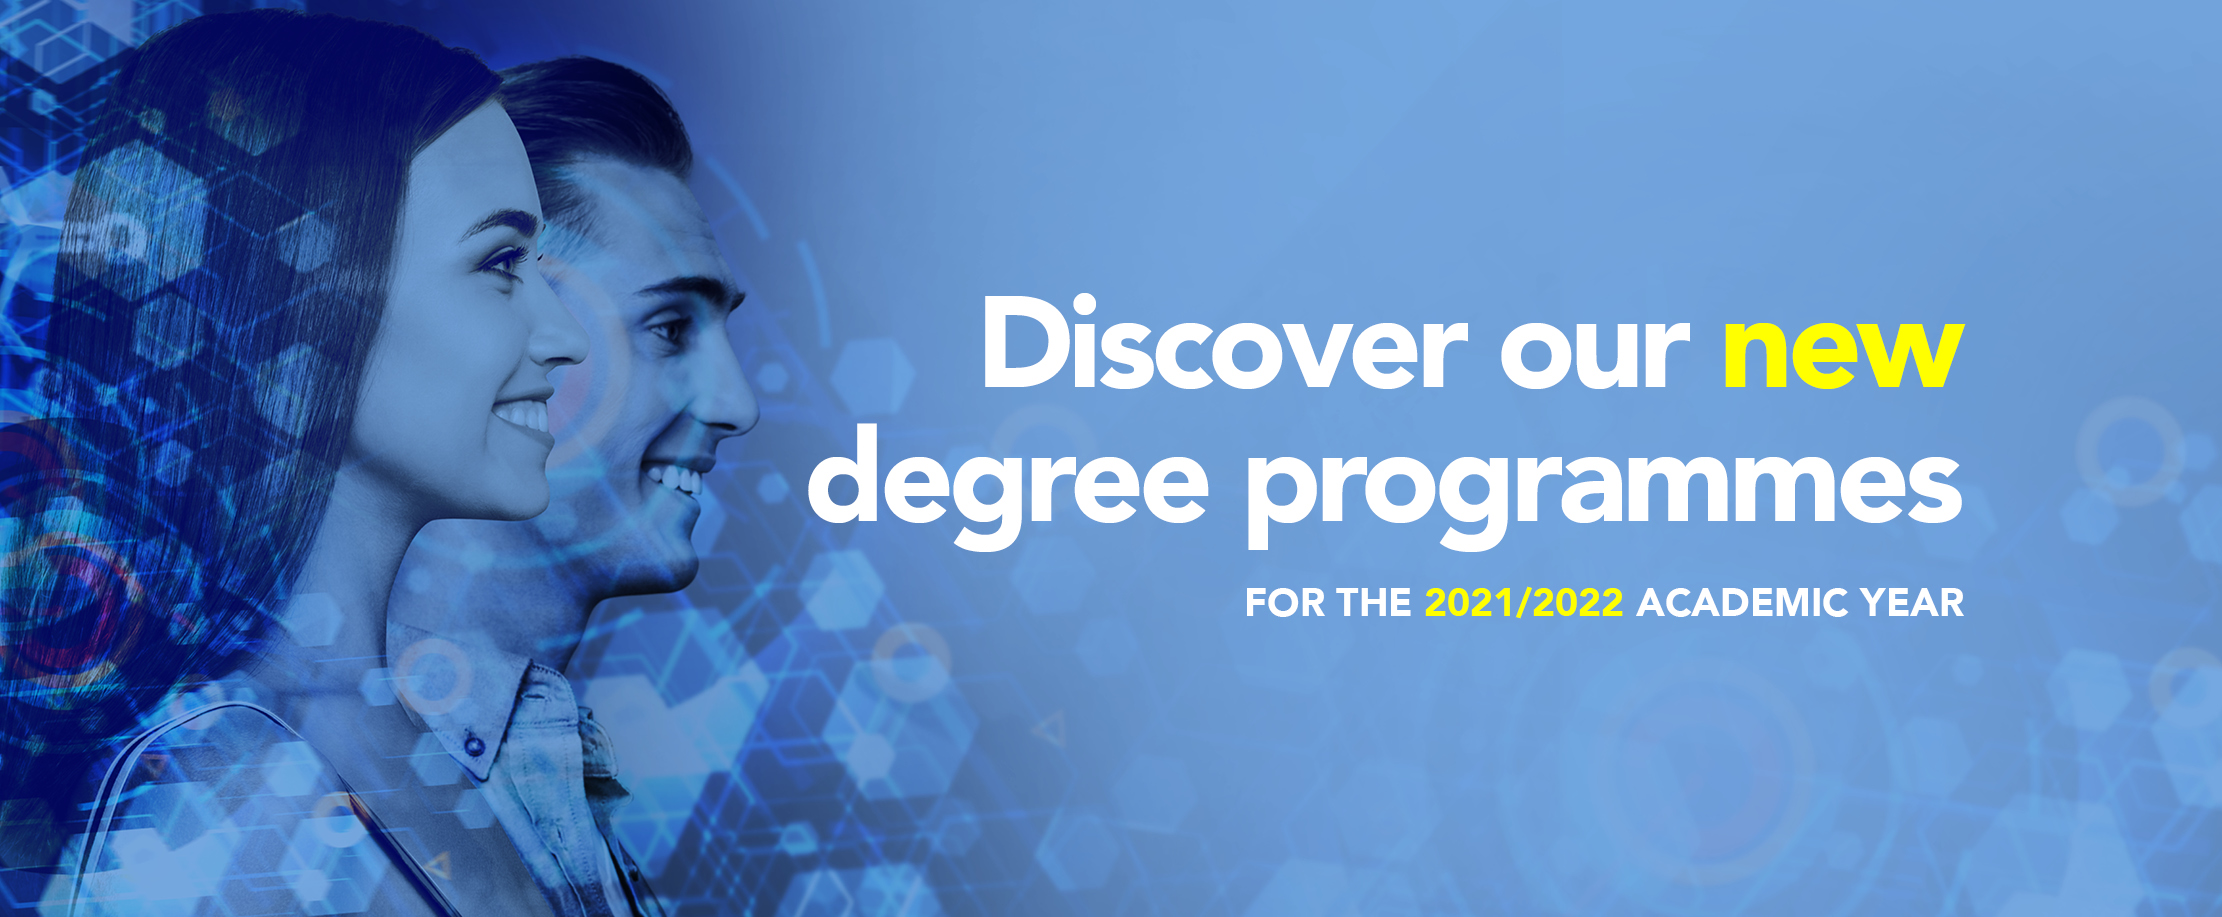 Discover our new degree programmes